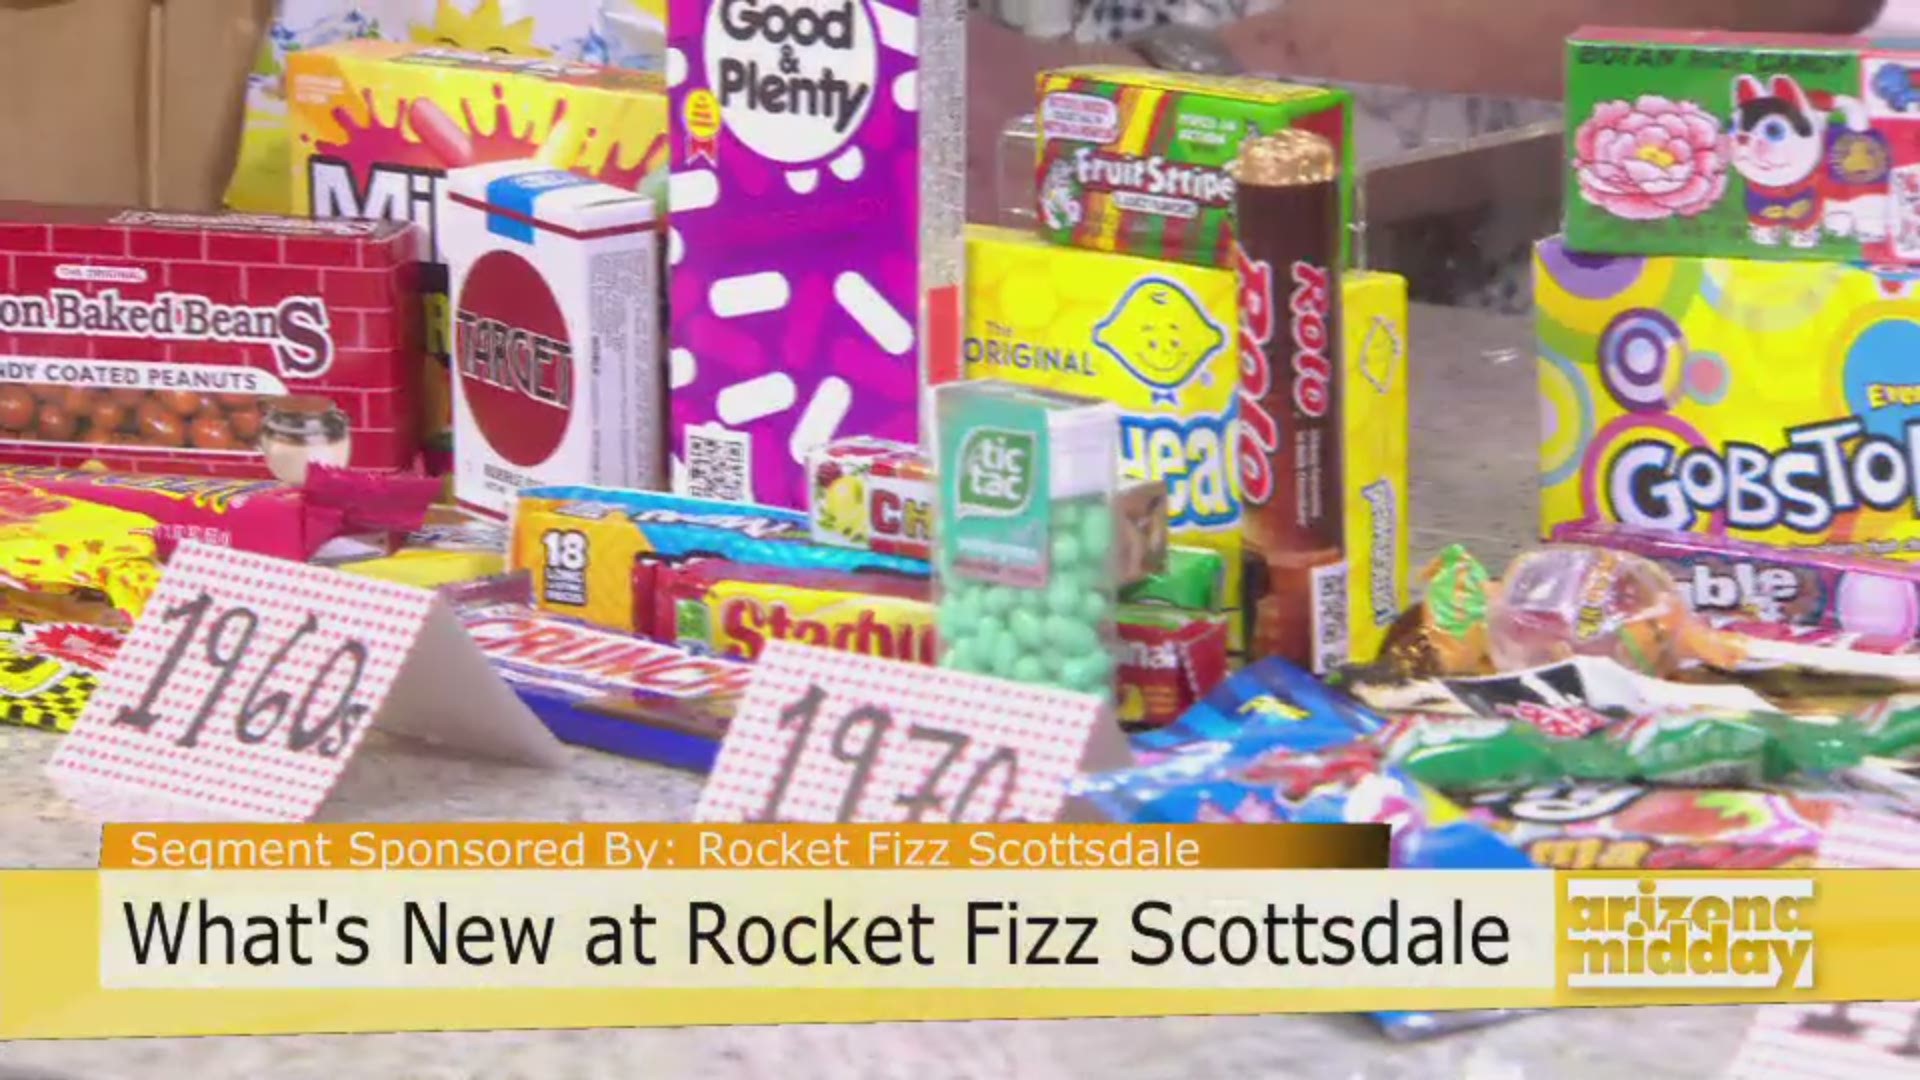 Sue Engdahl shows us all the candies you can find at Rocket Fizz Scottsdale – candies from the 1950s to what’s trending now!